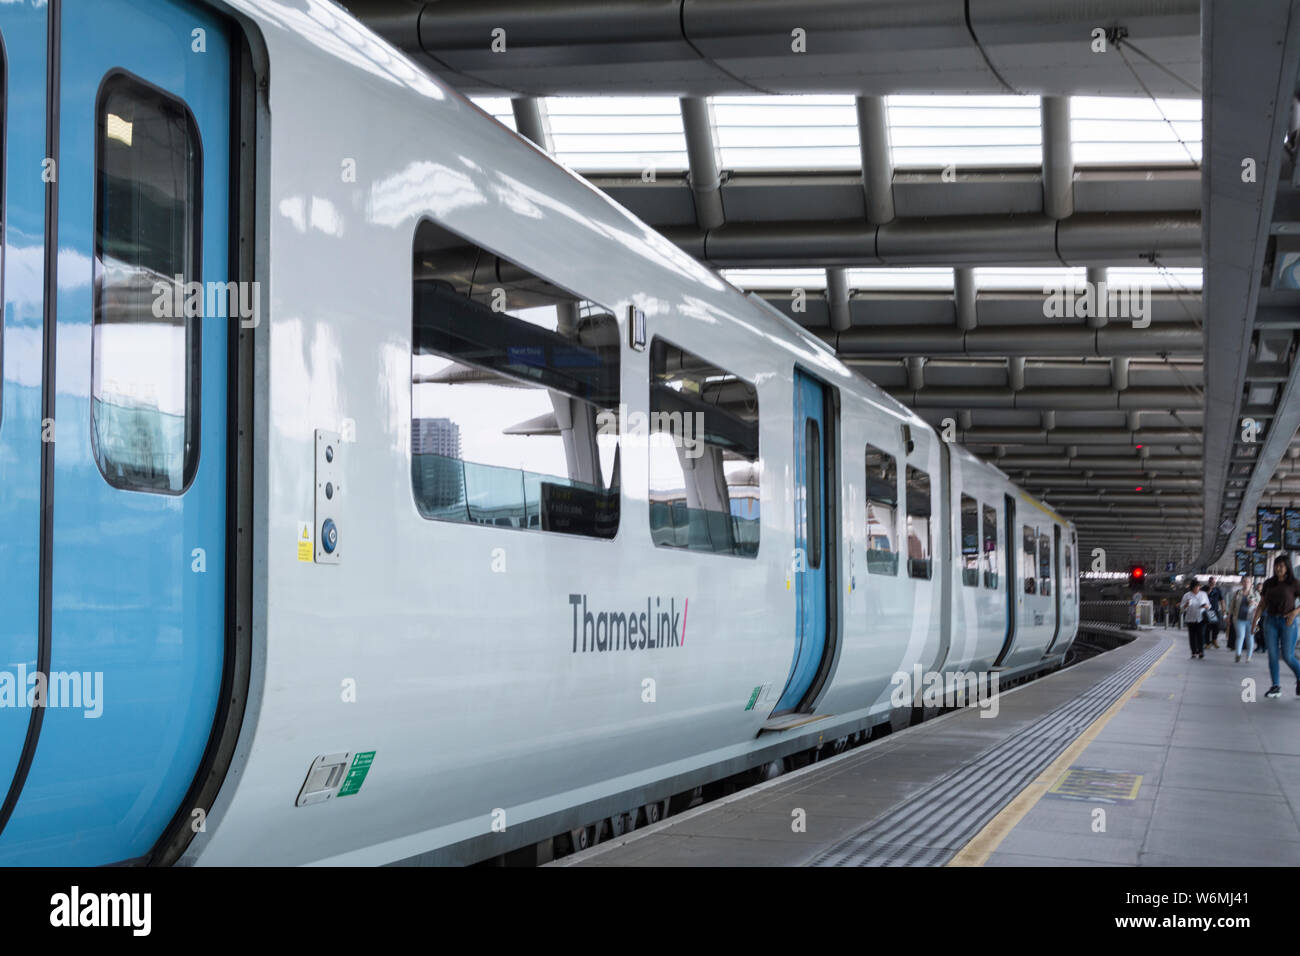 Close-up of a Network Rail ThamesLink train carriage at Cannon Street station, London, UK Stock Photo